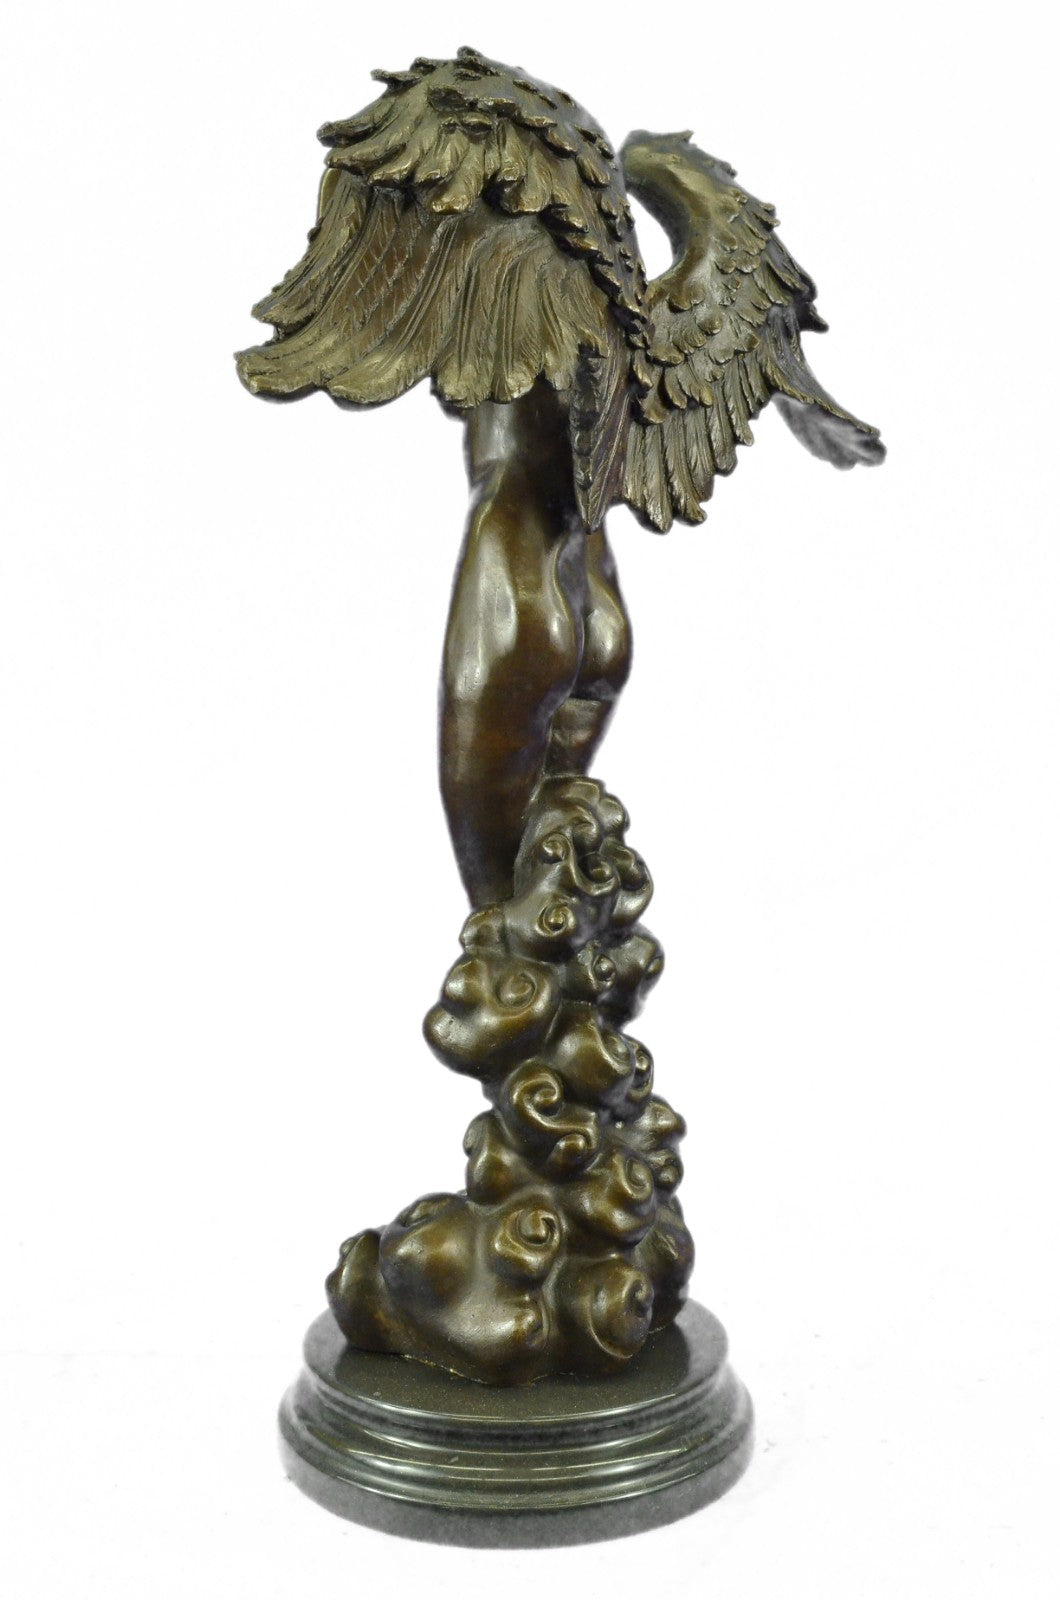 Mythical Extra Large Nude Female Angel Bronze Sculpture Classic Artwork Figure